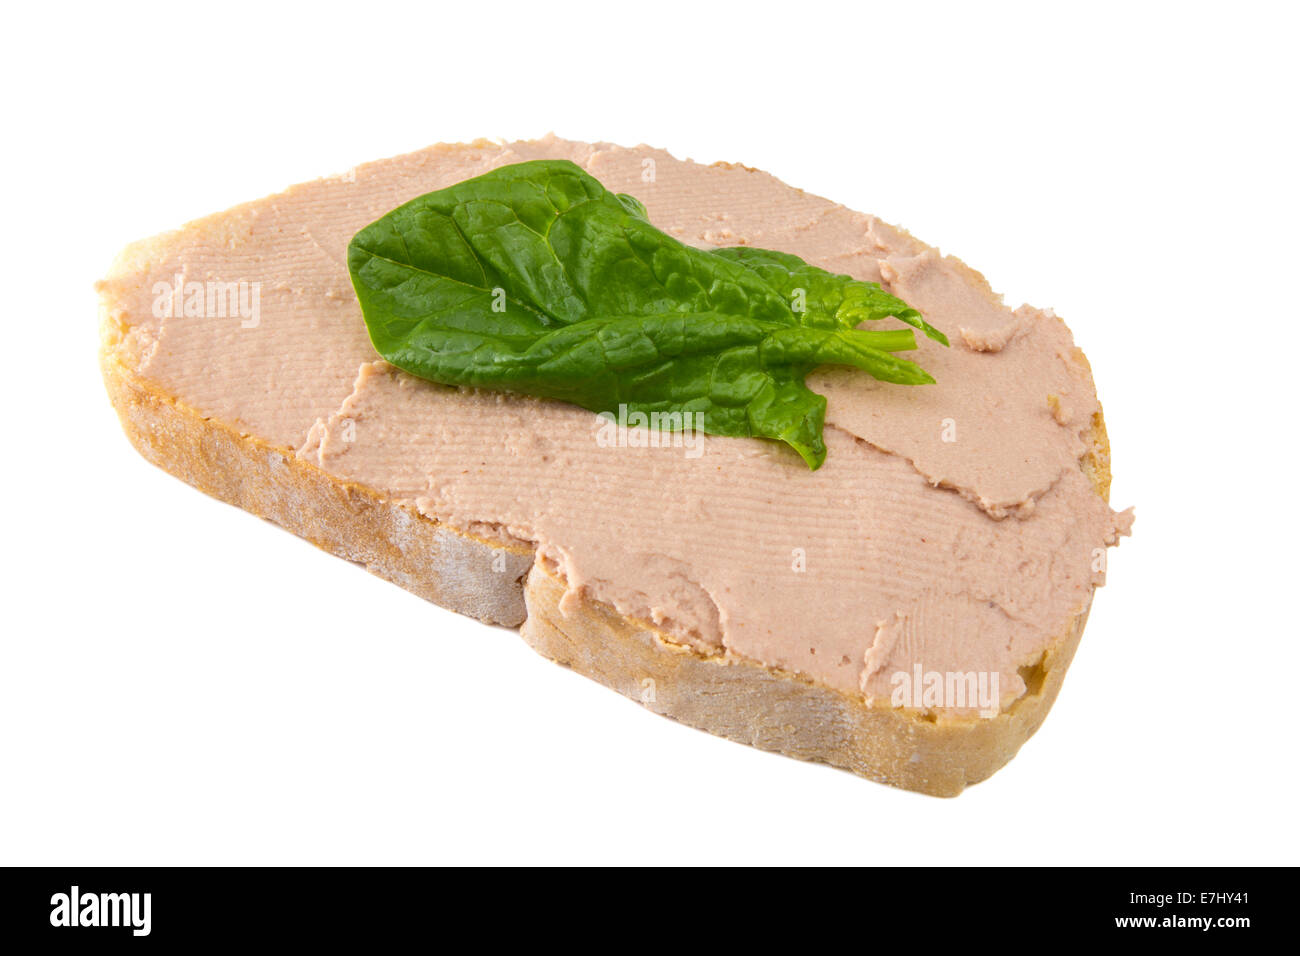 Sandwich with pate and one spinach leaf isolated on white background Stock Photo